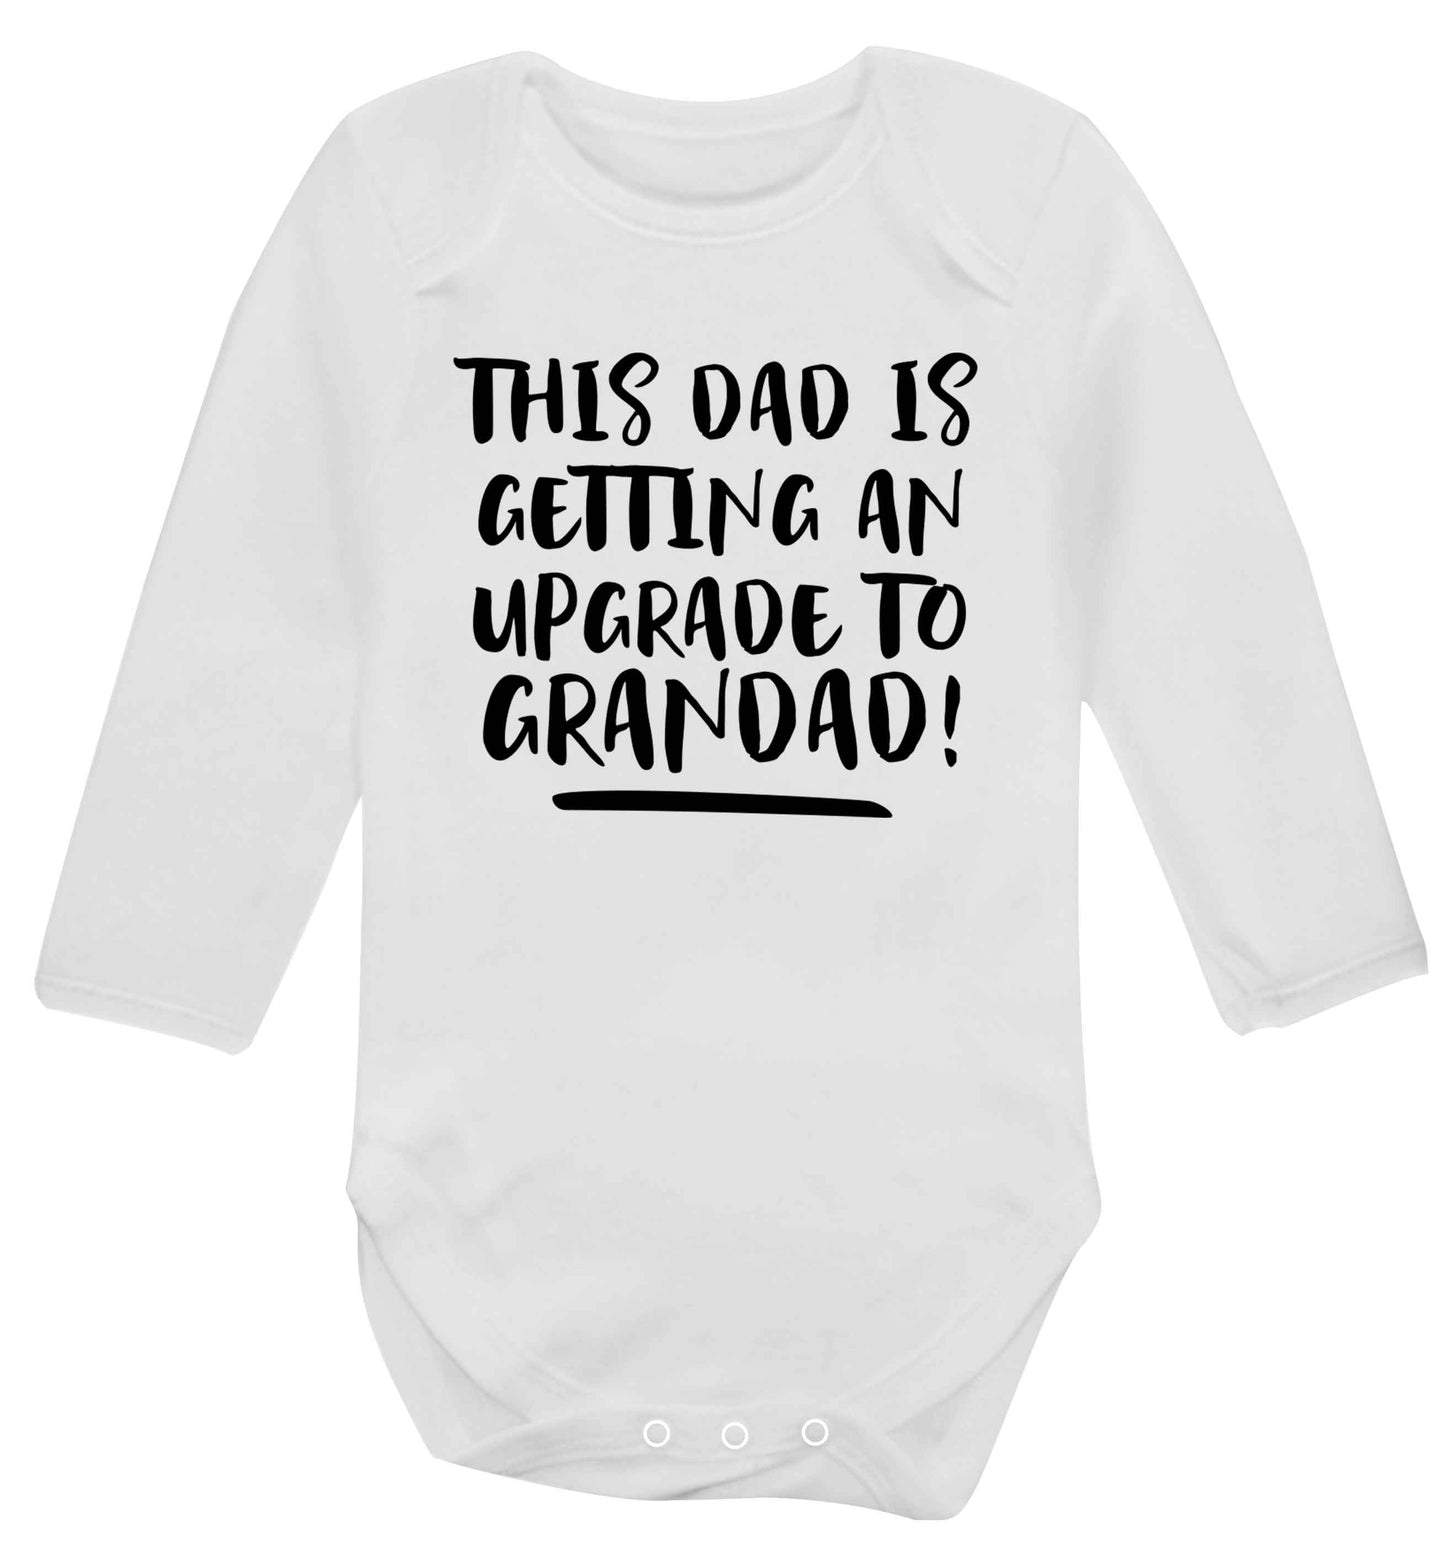 This dad is getting an upgrade to grandad! Baby Vest long sleeved white 6-12 months